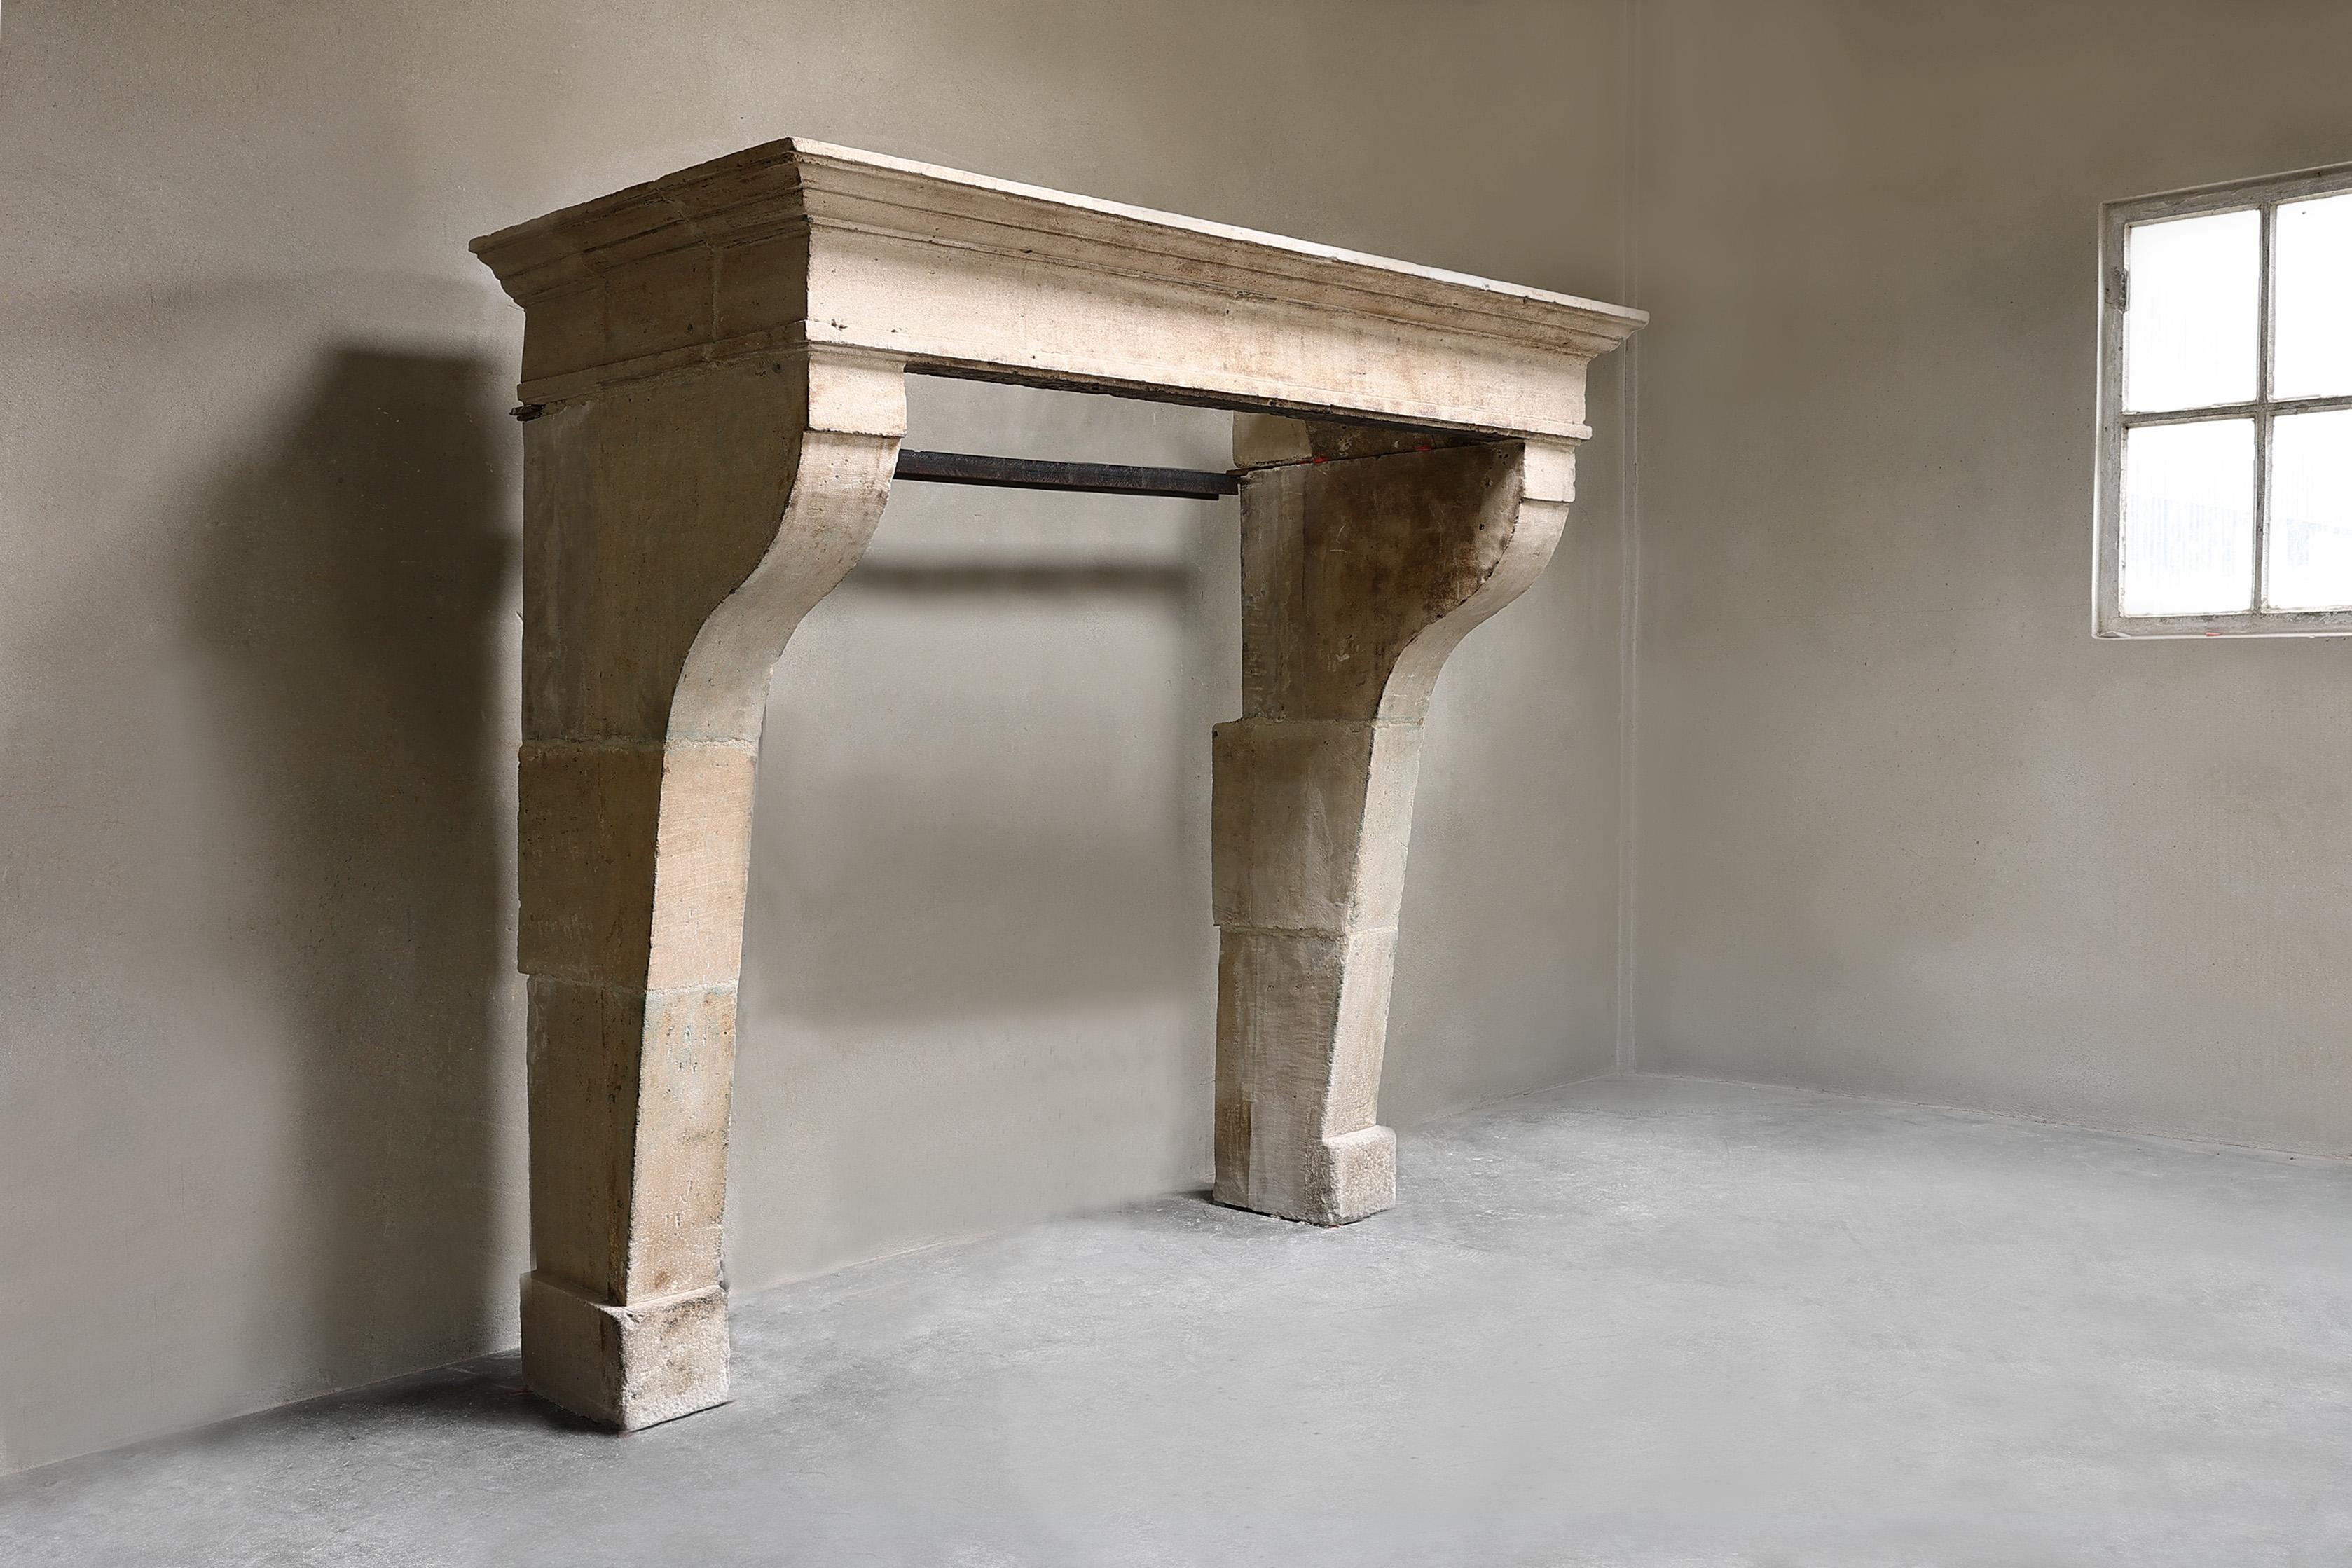 Compact antique of French limestone from the 19th century! A very nice rustic fireplace with warm colors, beautiful shapes and no ornaments. This fireplace comes from the area of Beaune, a city in France.